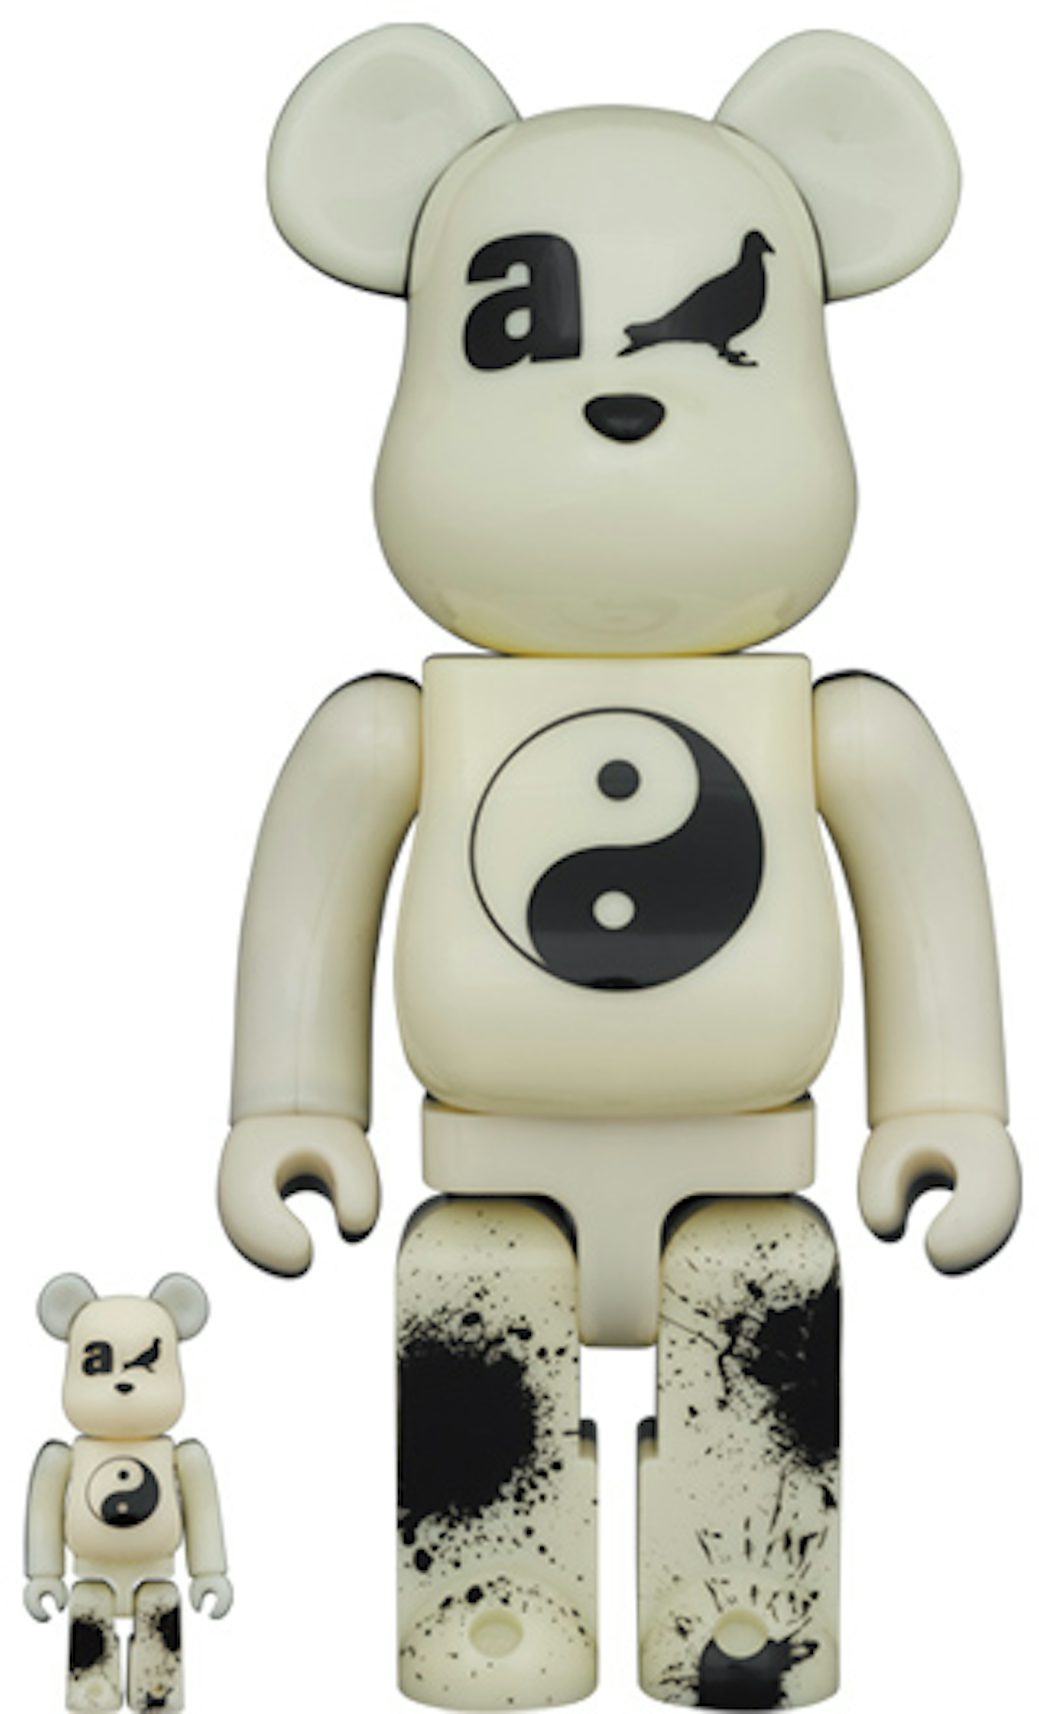 What Are the Types of Bearbrick Relseases?Your Guide to Bearbrick